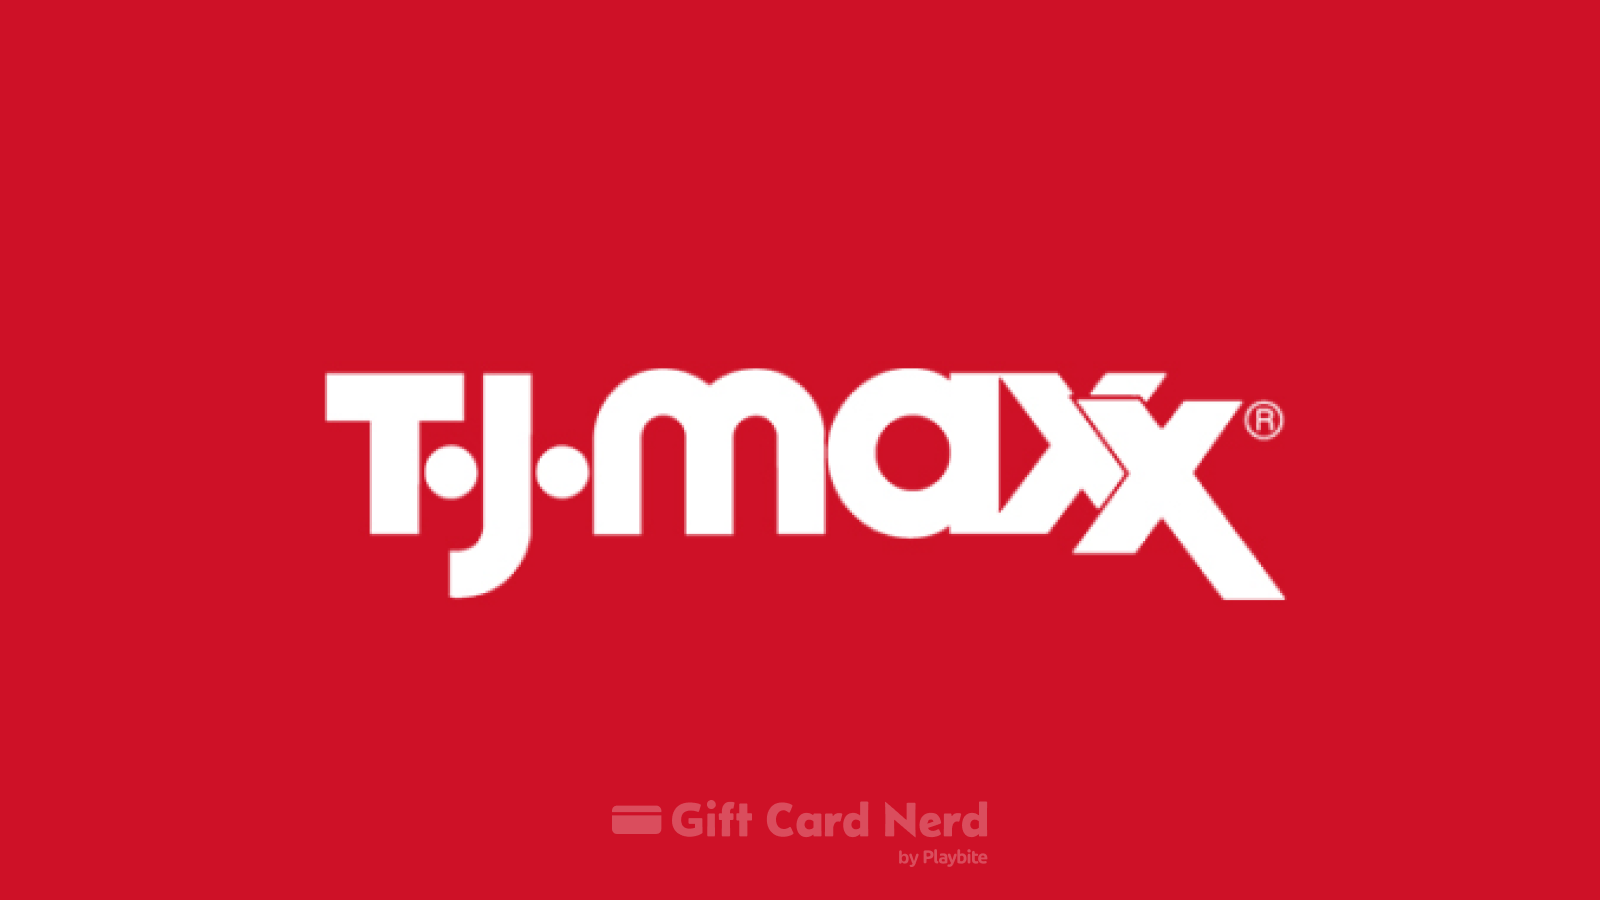 Can You Find TJ Maxx Gift Cards at Walmart?